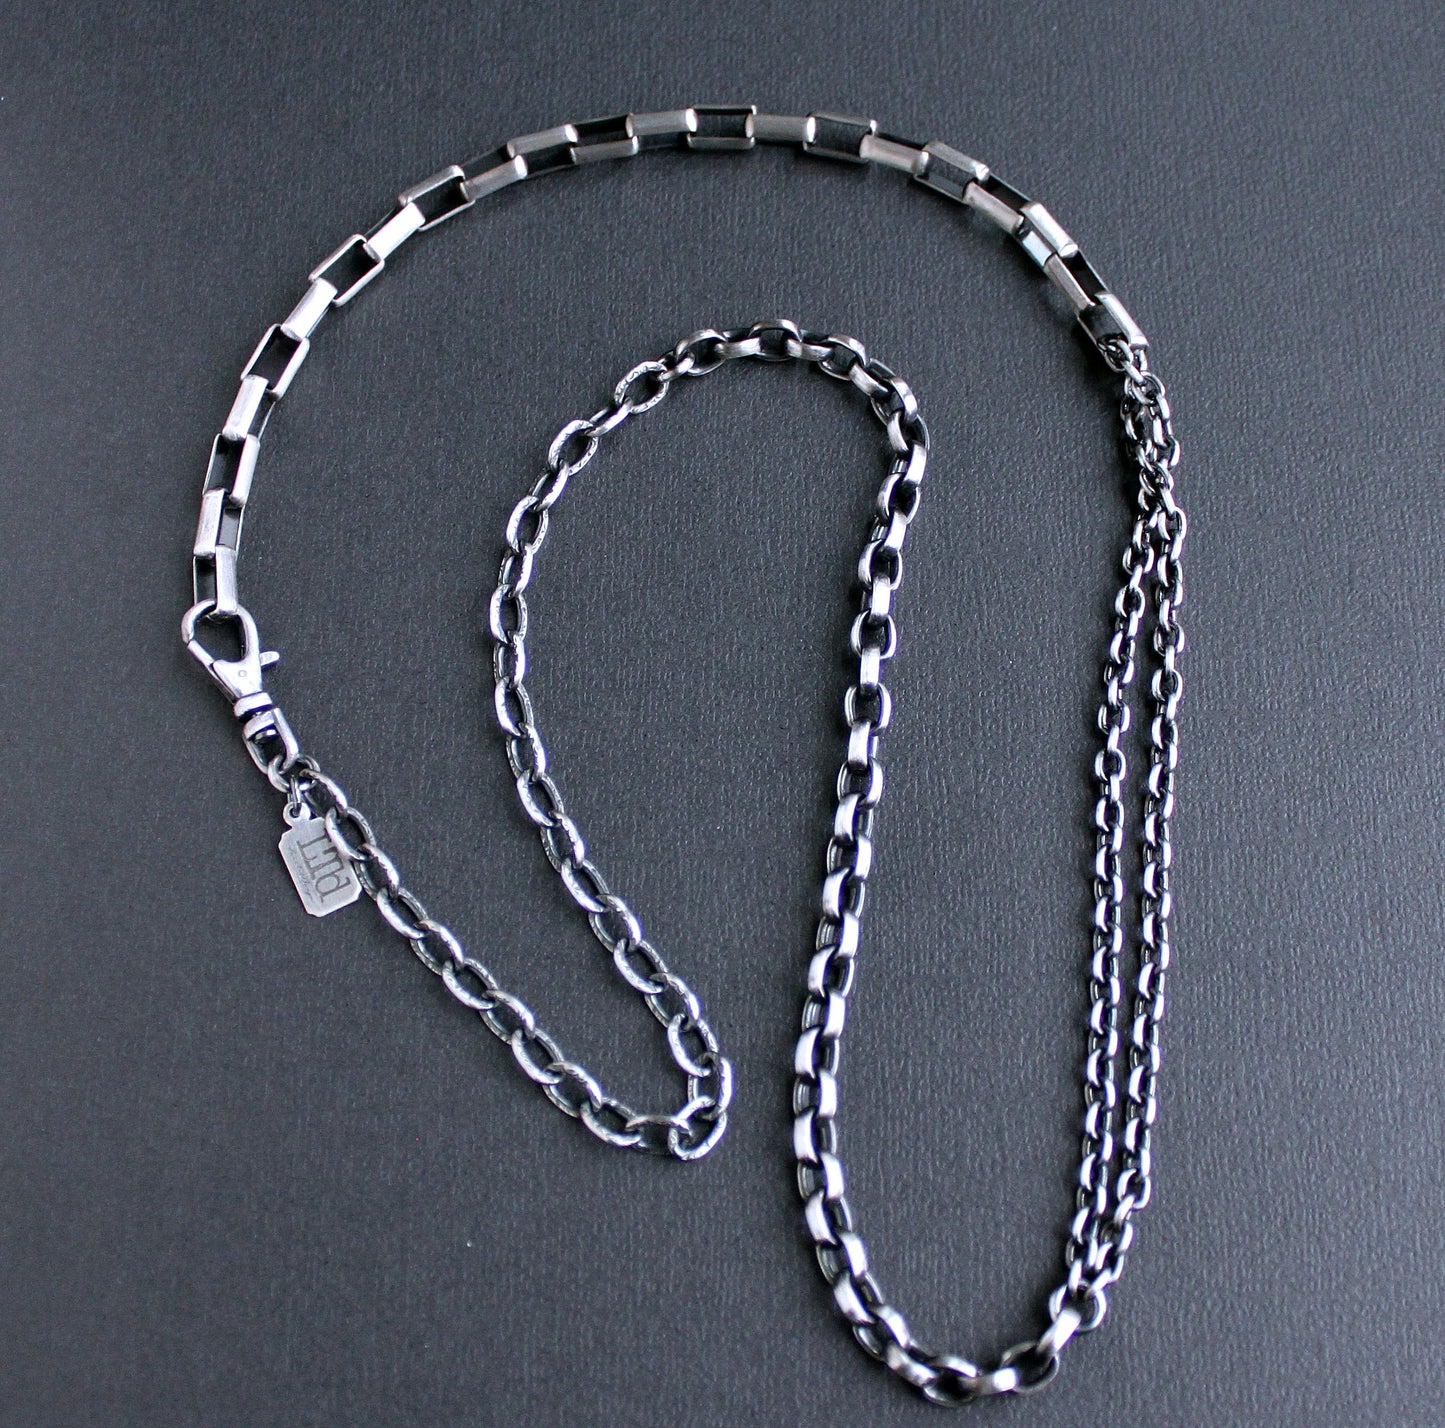 Silver Mixed Chain Necklace, 26 inches